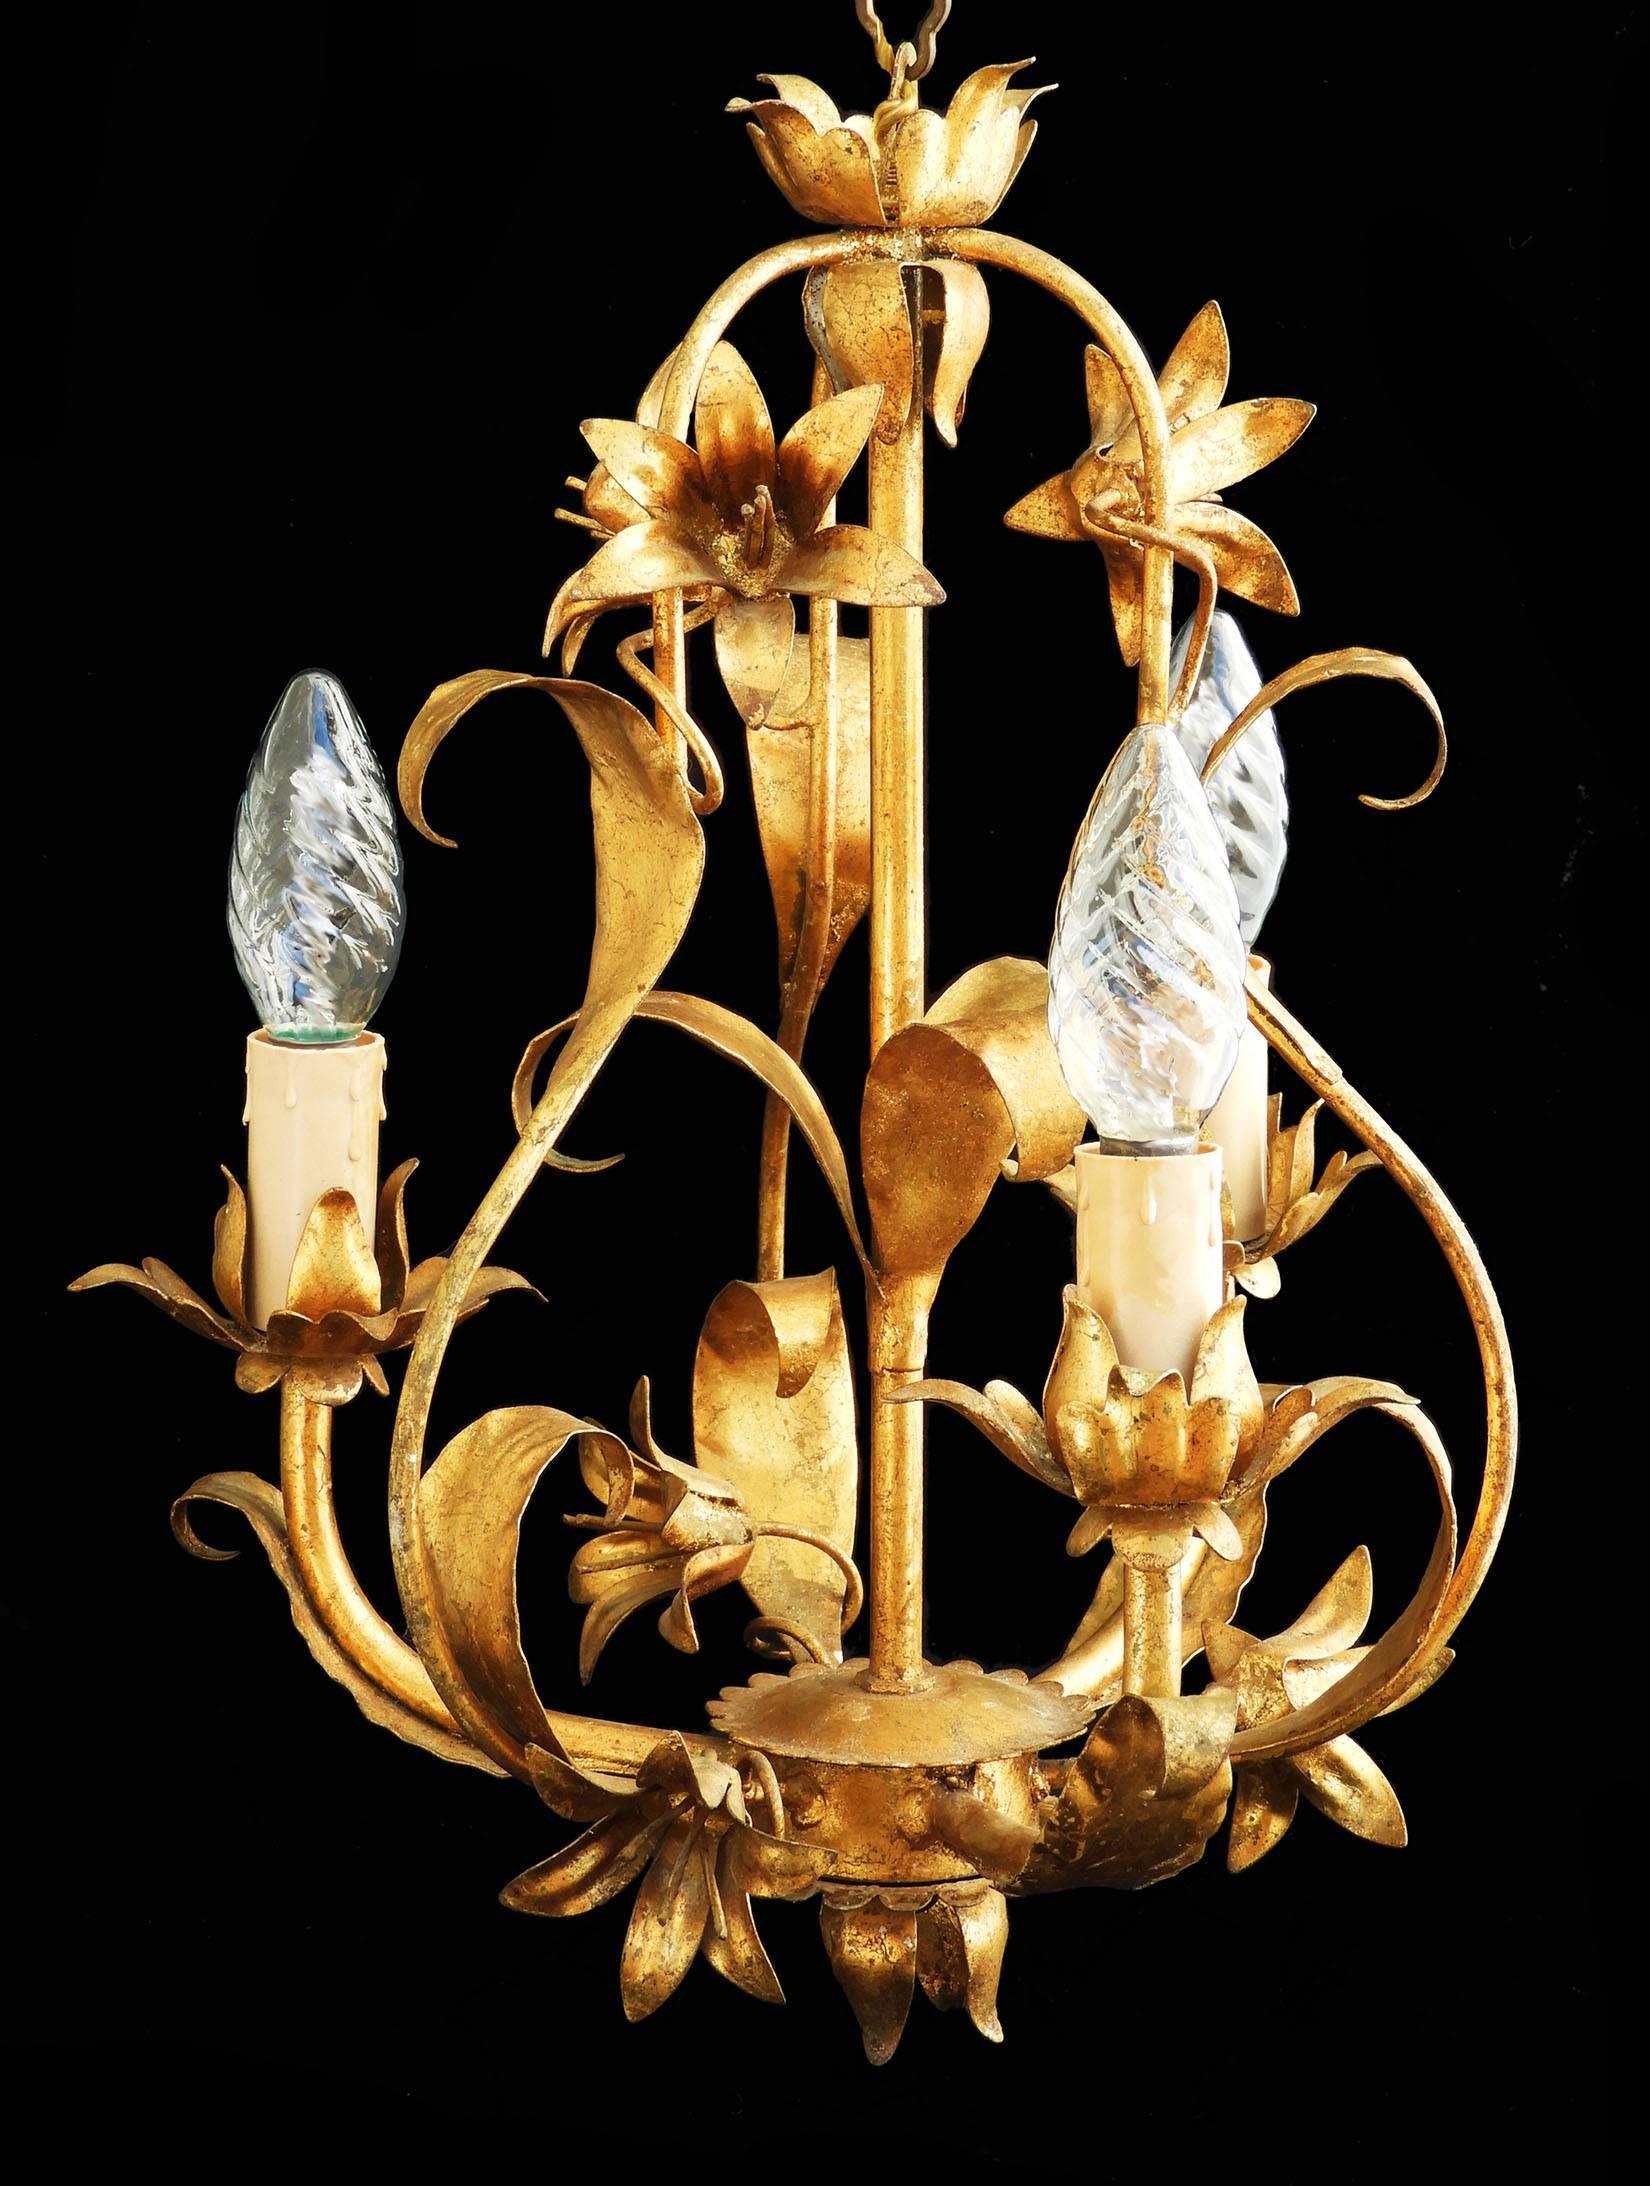 French Mid-Century toleware chandelier circa 1950
Gilded toleware three-light cage chandelier
Drop 72cms can be lengthened to give a longer drop if required please ask
In good original condition
This will be re-wired and tested to USA or UK and